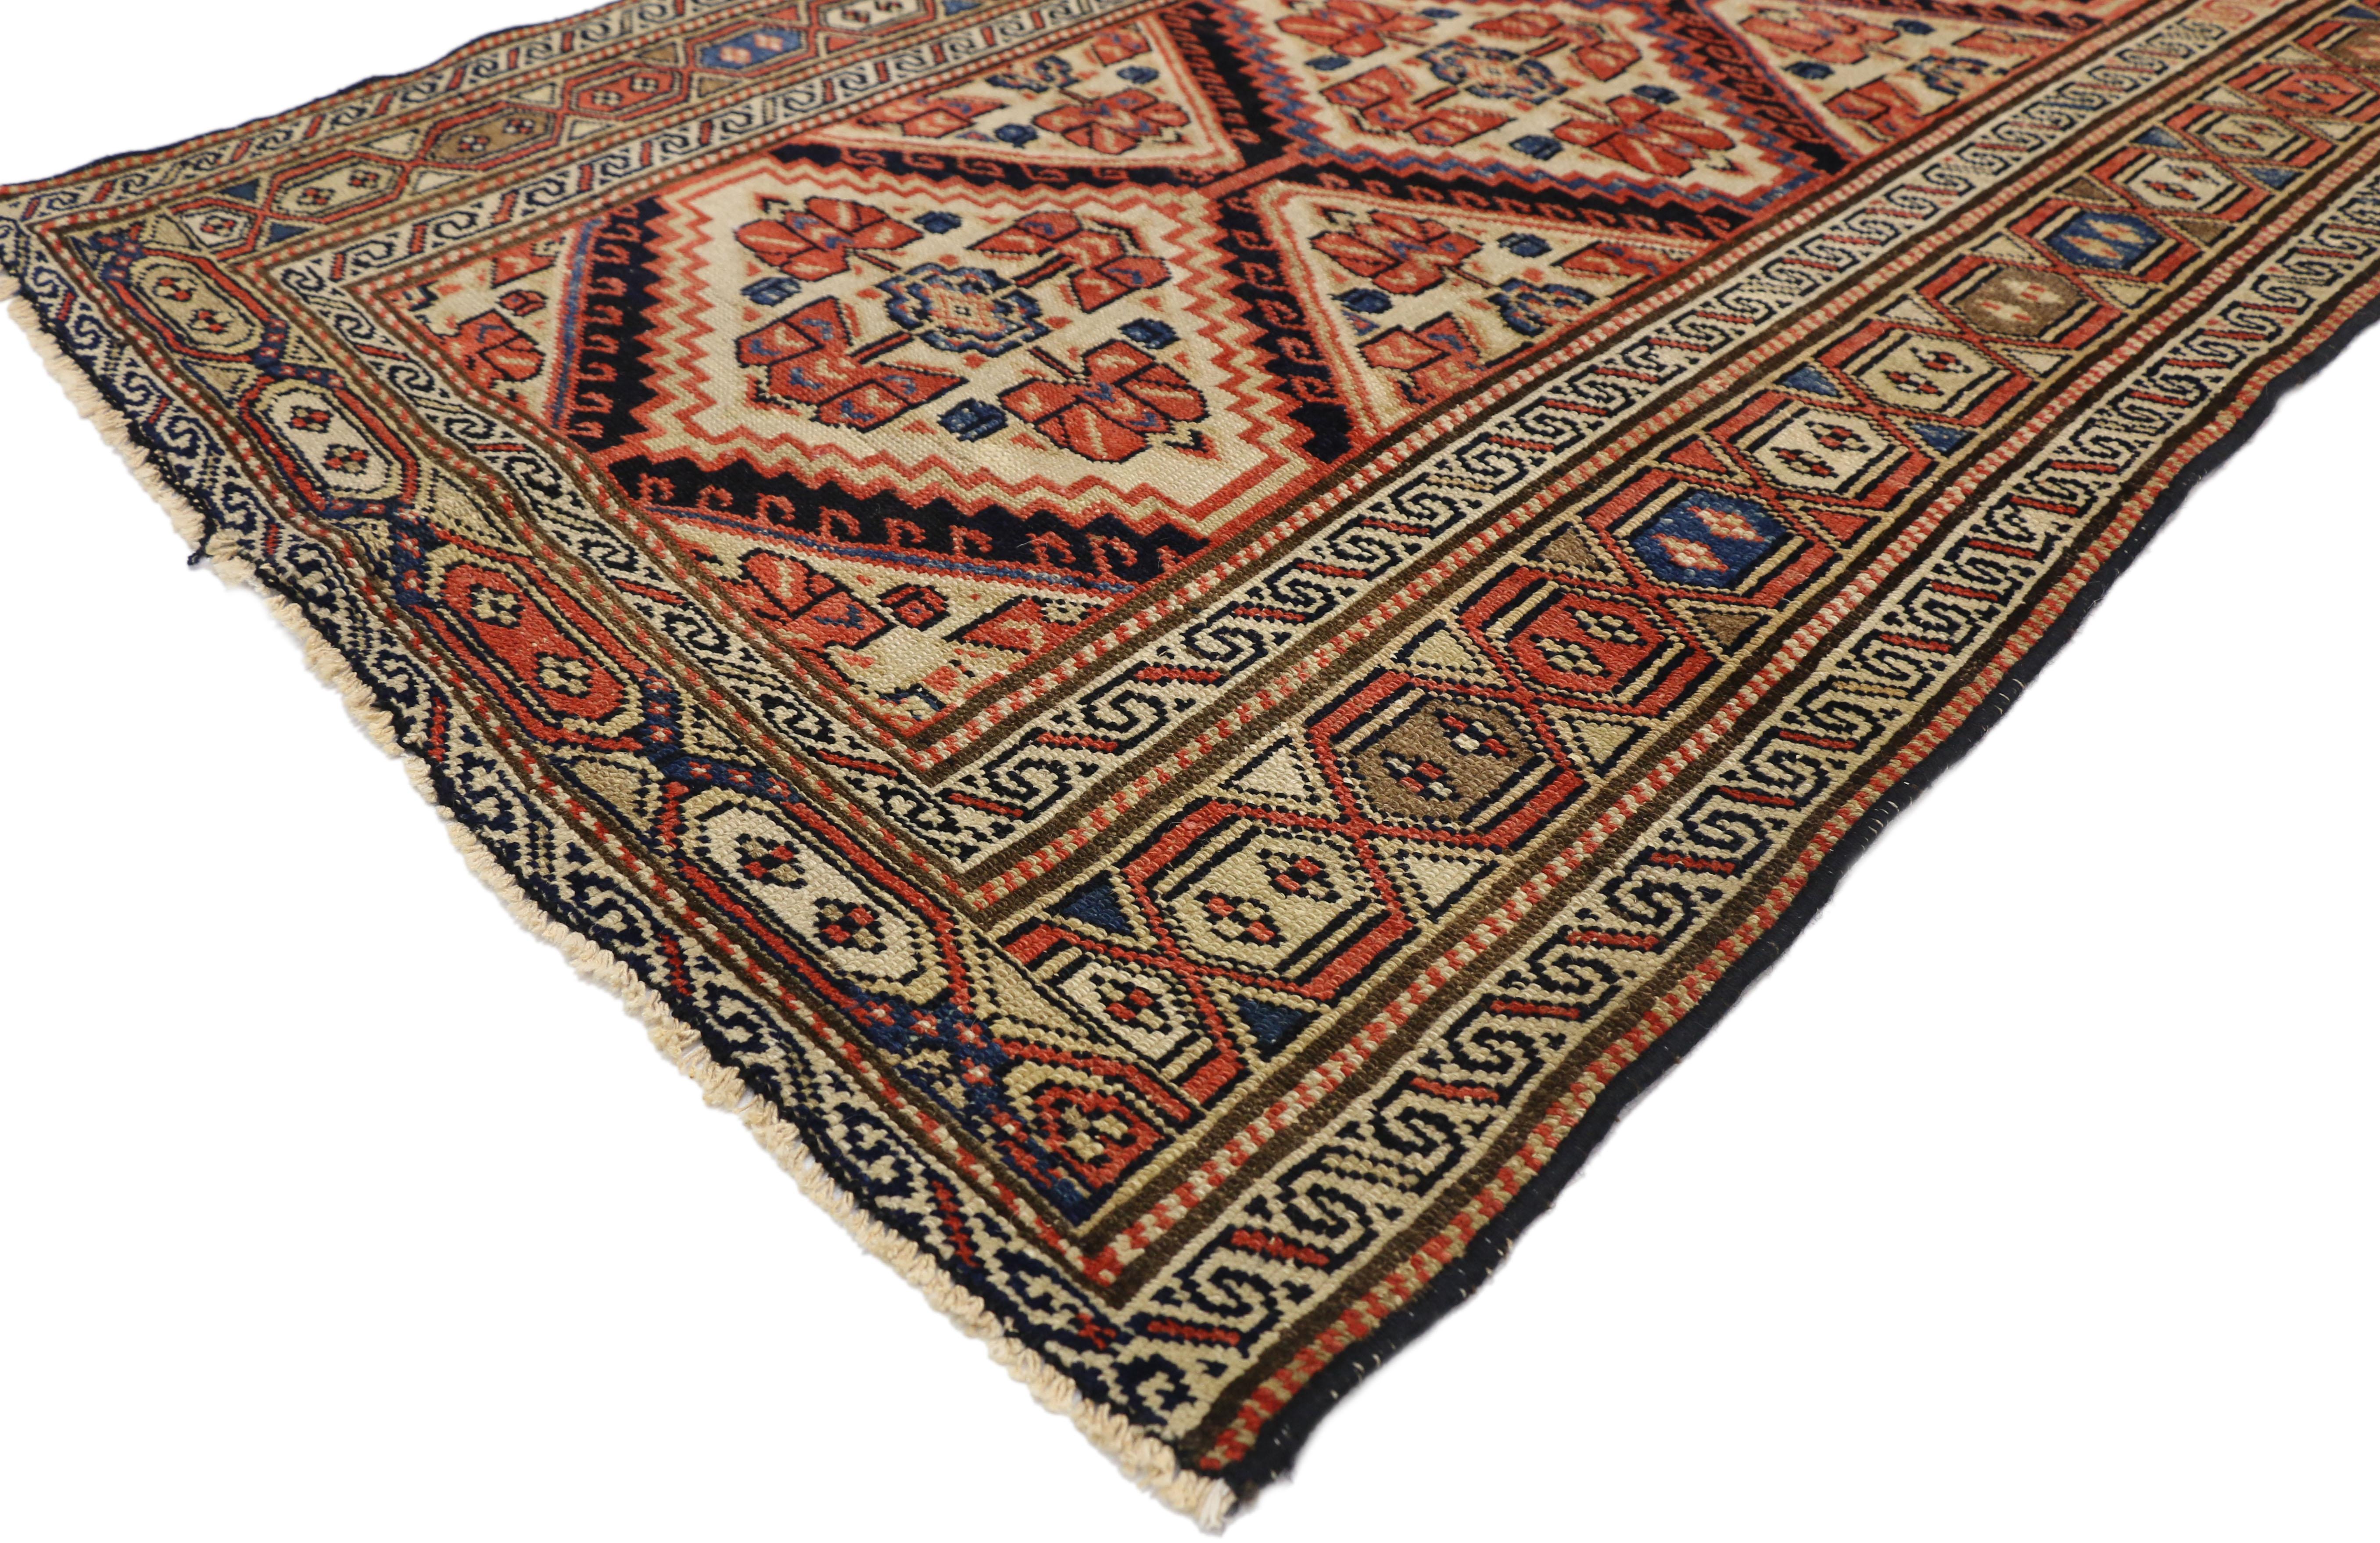 77280 Antique Persian Malayer Hallway runner. This hand knotted wool antique Persian Malayer hallway runner features an all-over geometric pattern composed of a pole medallion with nomadic village style. The middle hexagonal medallion is filled